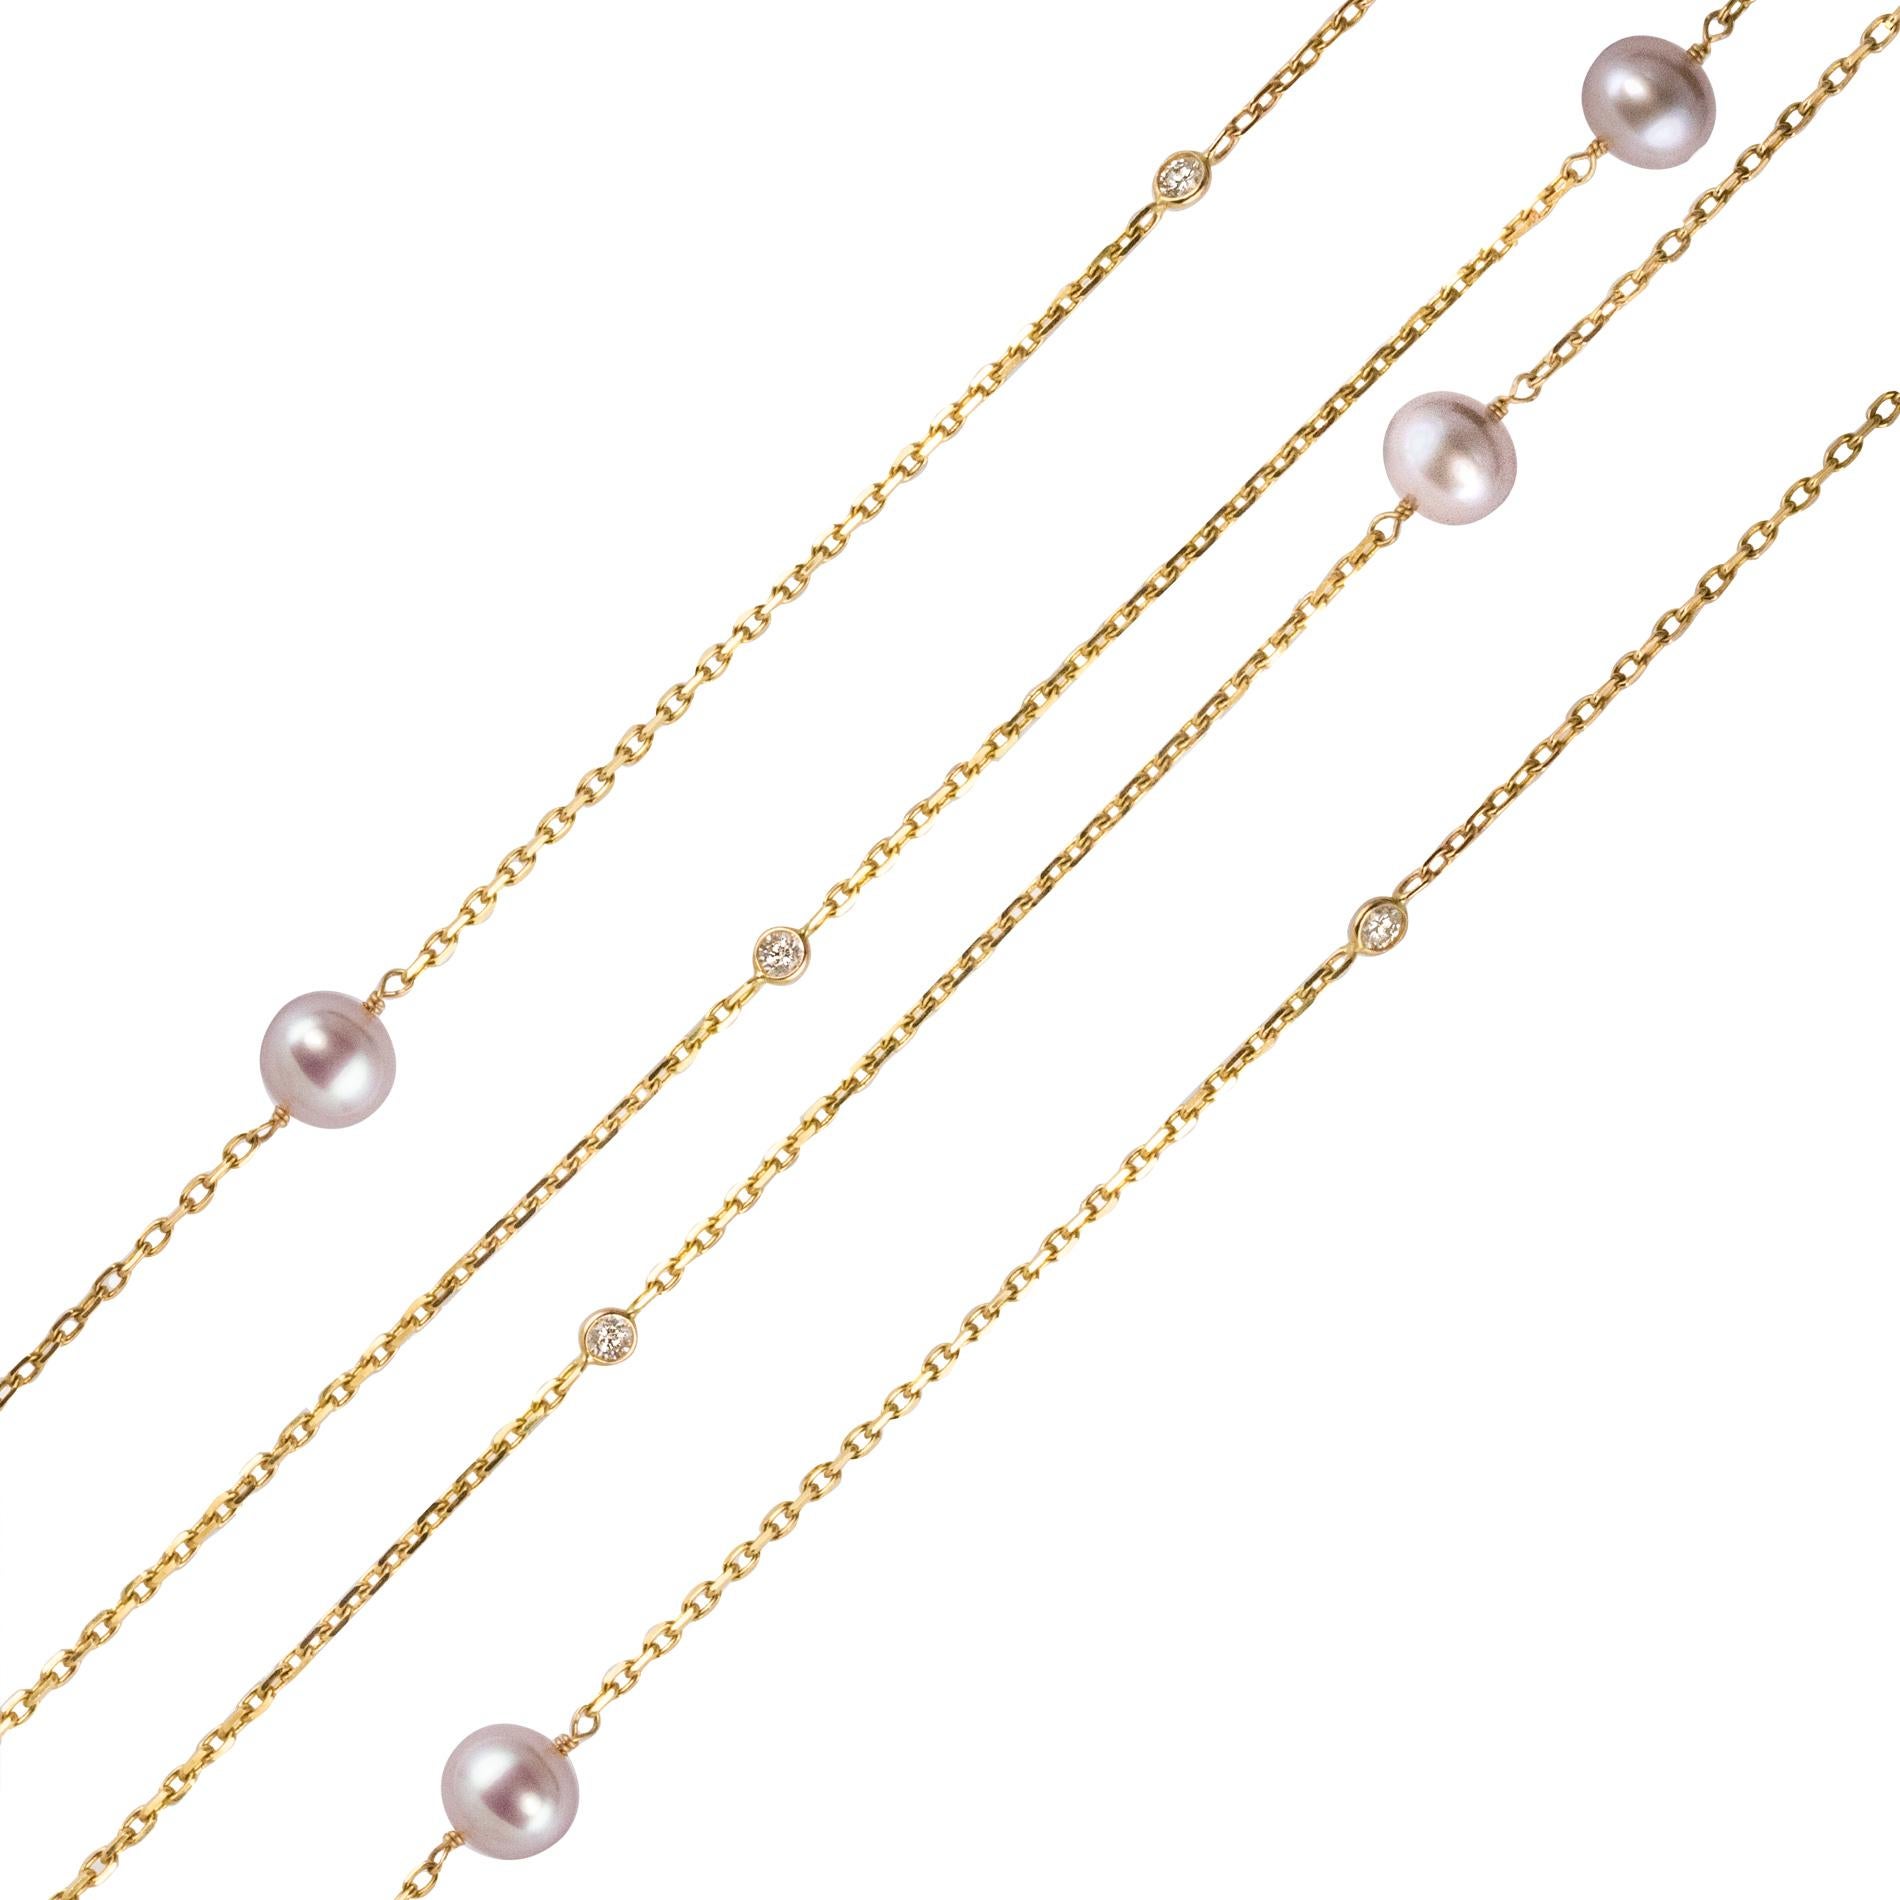 Baume Creation - Unique piece.
Long necklace in 18 karat yellow gold, eagle's head hallmark.
Long gold necklace, it is made up of a convict link chain regularly punctuated with pink orient cultured pearls, and modern brilliant- cut diamonds in